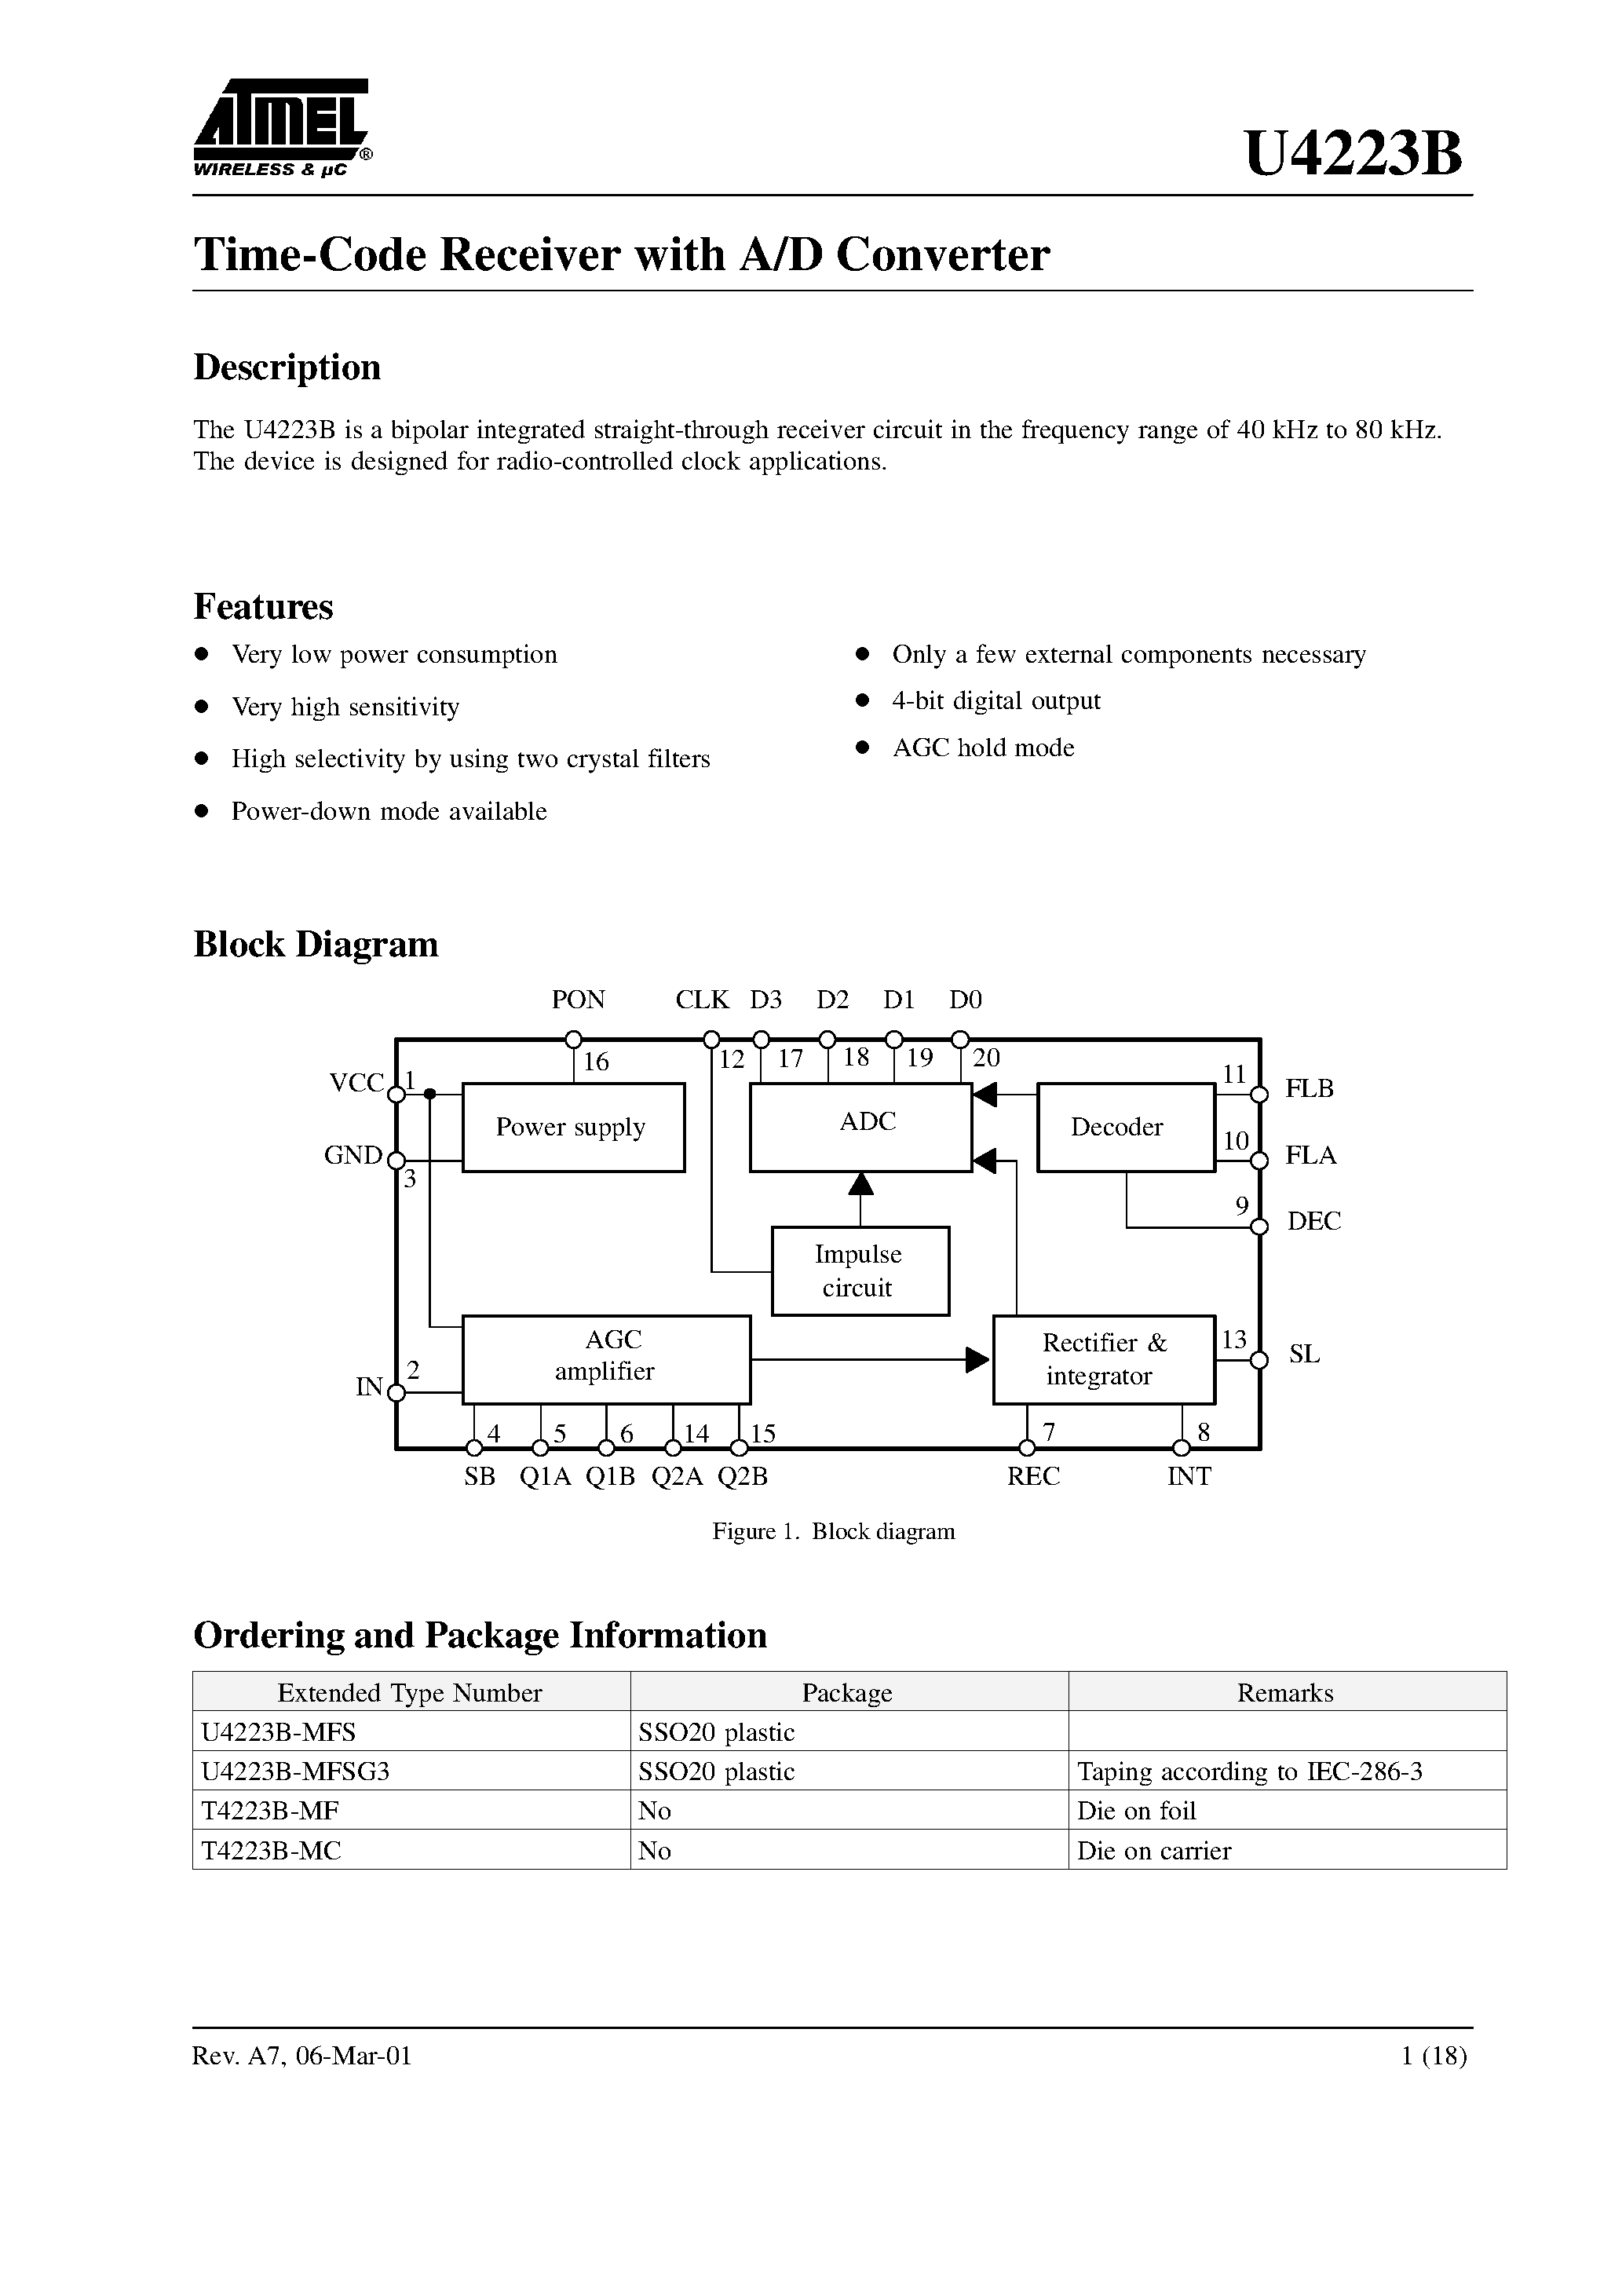 Datasheet U4223B - Time-Code Receiver with A/D Converter page 1